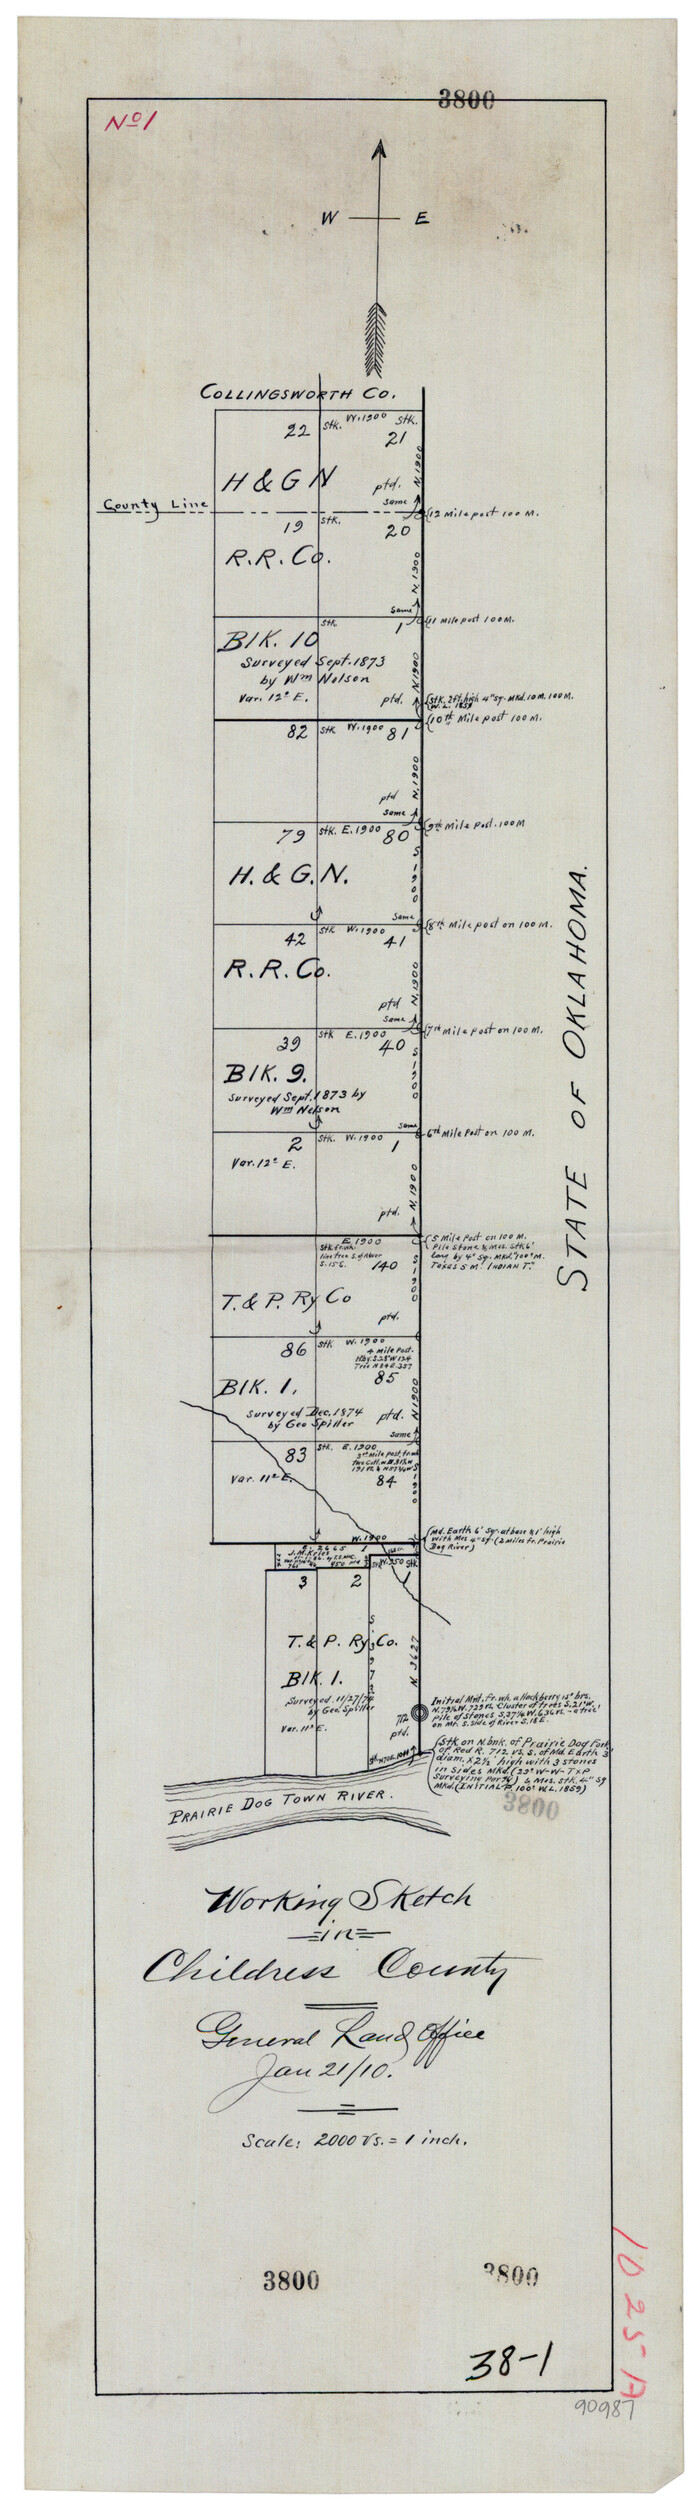 90425, Working Sketch in Childress County, Twichell Survey Records